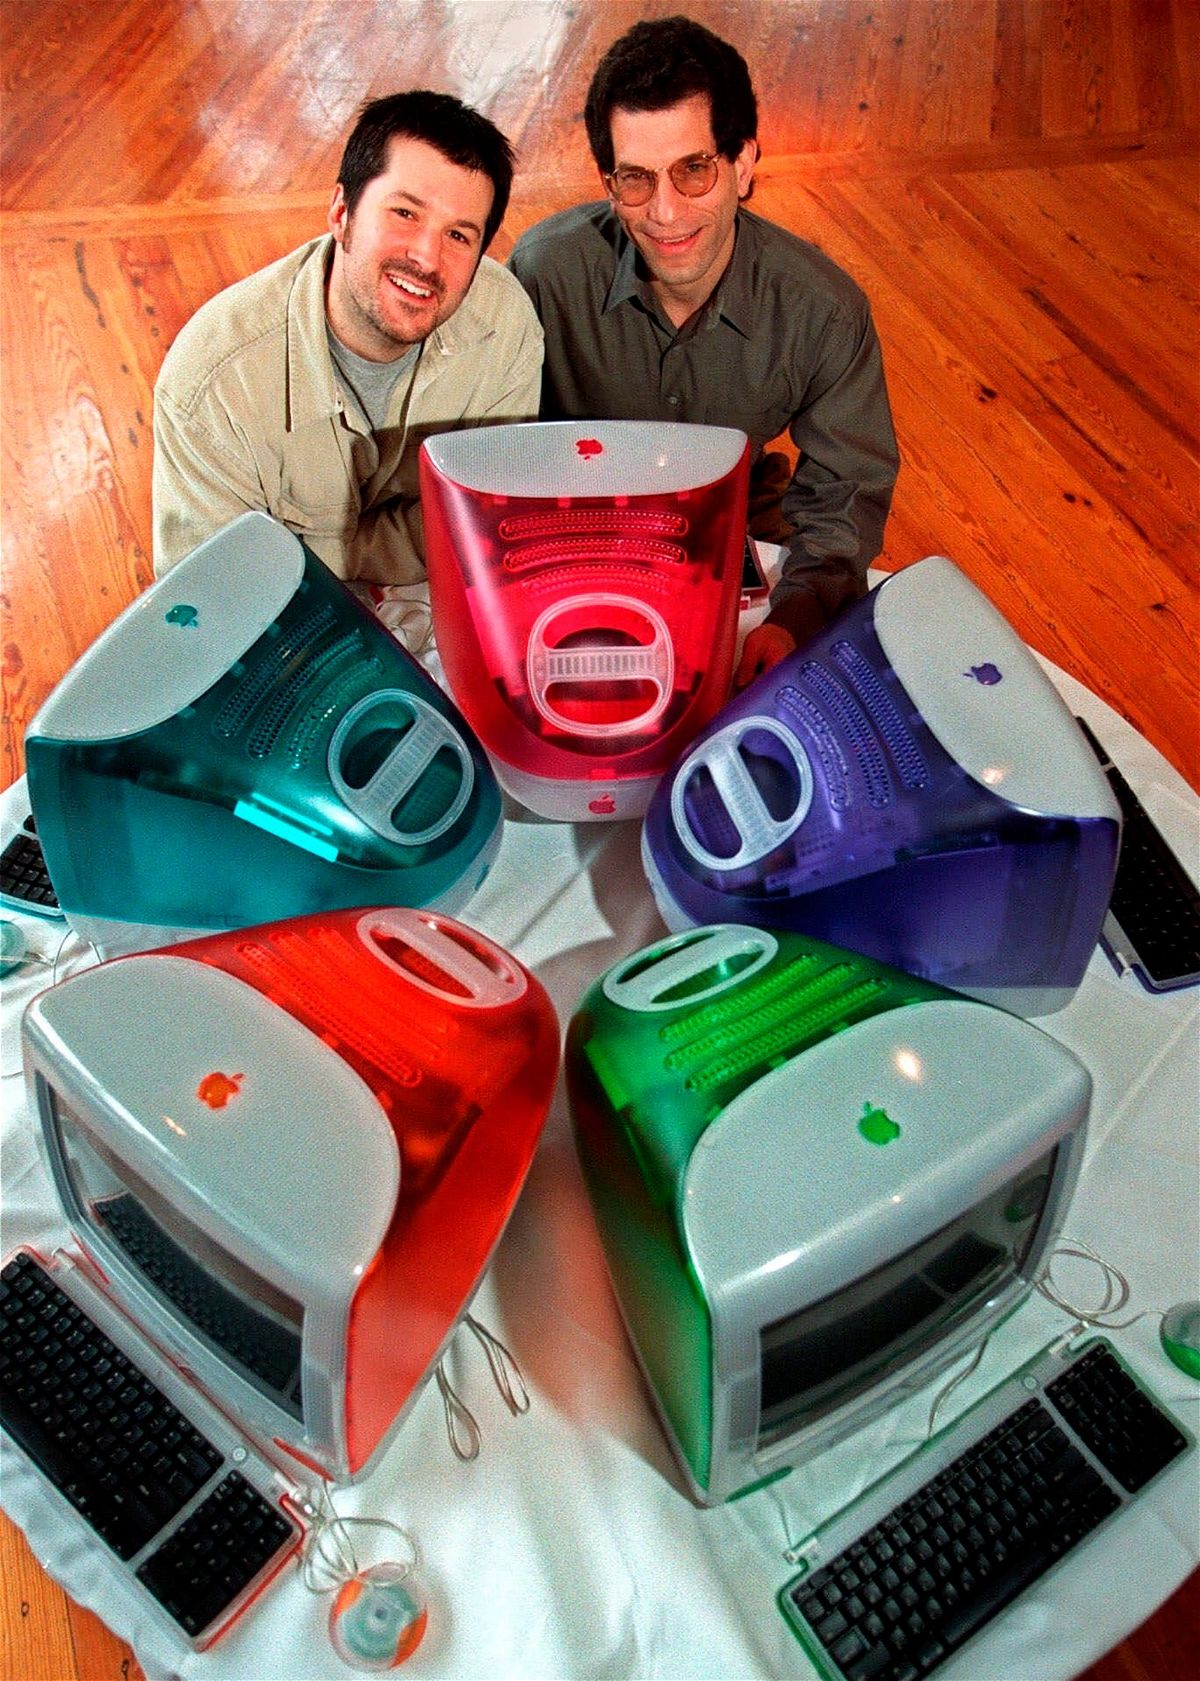 <i>Win McNamee/Reuters</i><br/>Ive's futuristic design for the iMac G3 was also meant to be accessible and tactile